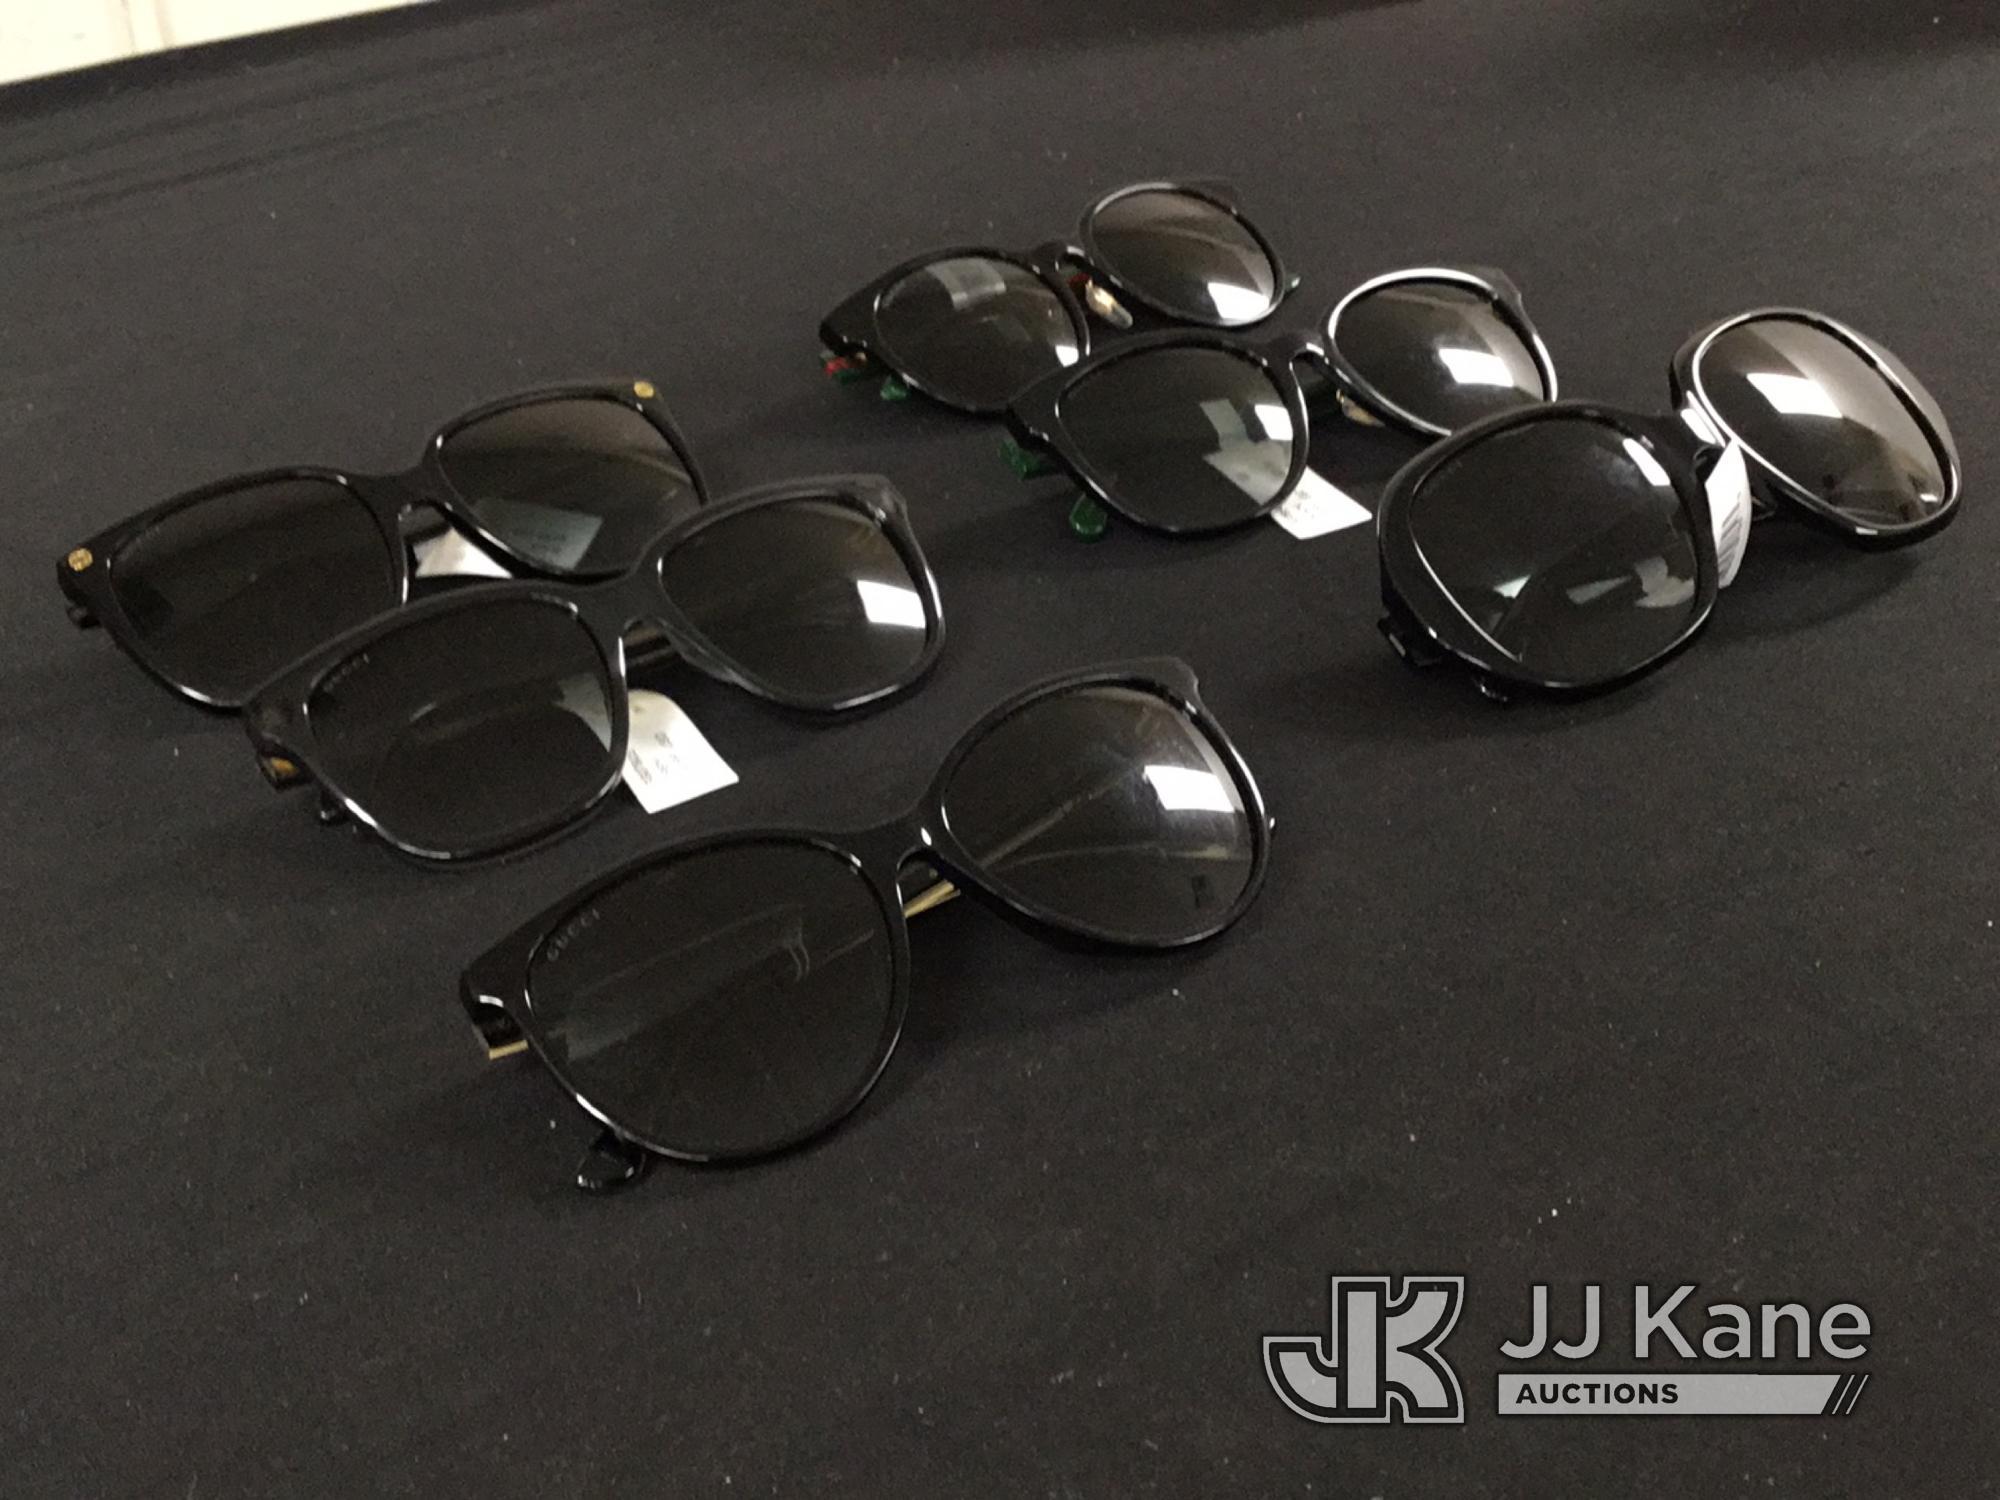 (Jurupa Valley, CA) Sunglasses lot | authenticity unknown (New) NOTE: This unit is being sold AS IS/